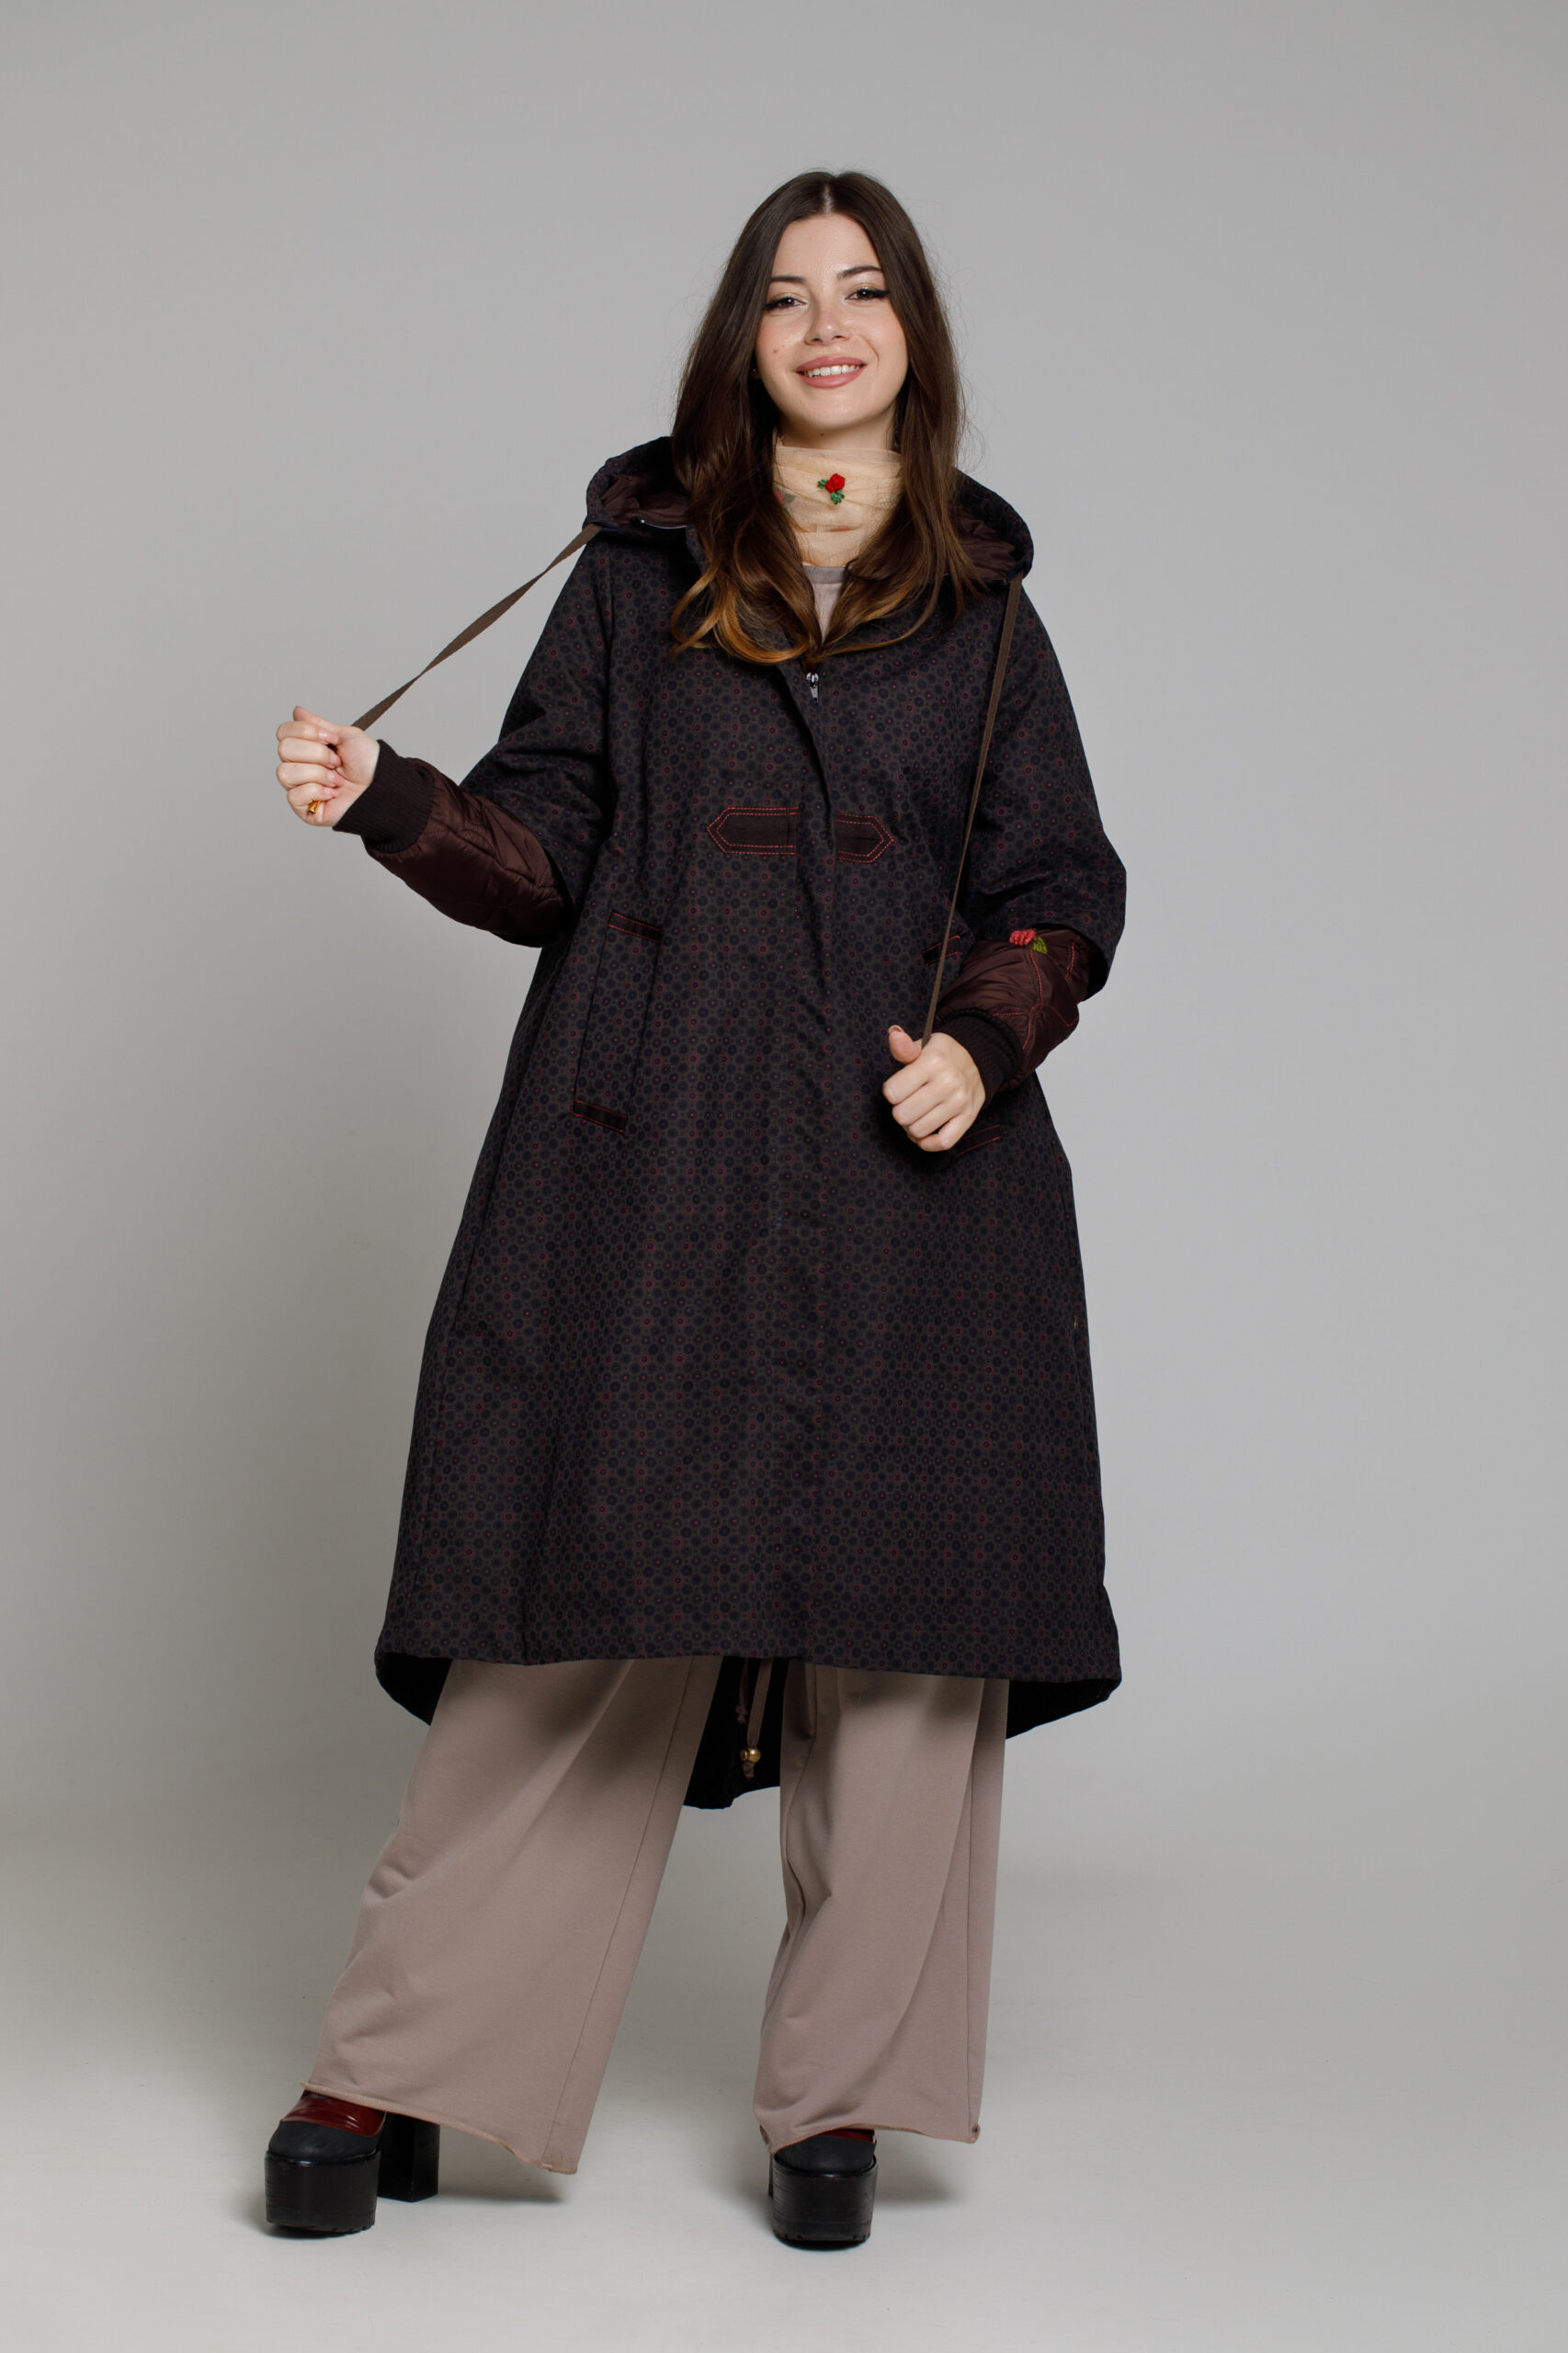 ZURY tercot overcoat with geometric and quilted print. Natural fabrics, original design, handmade embroidery